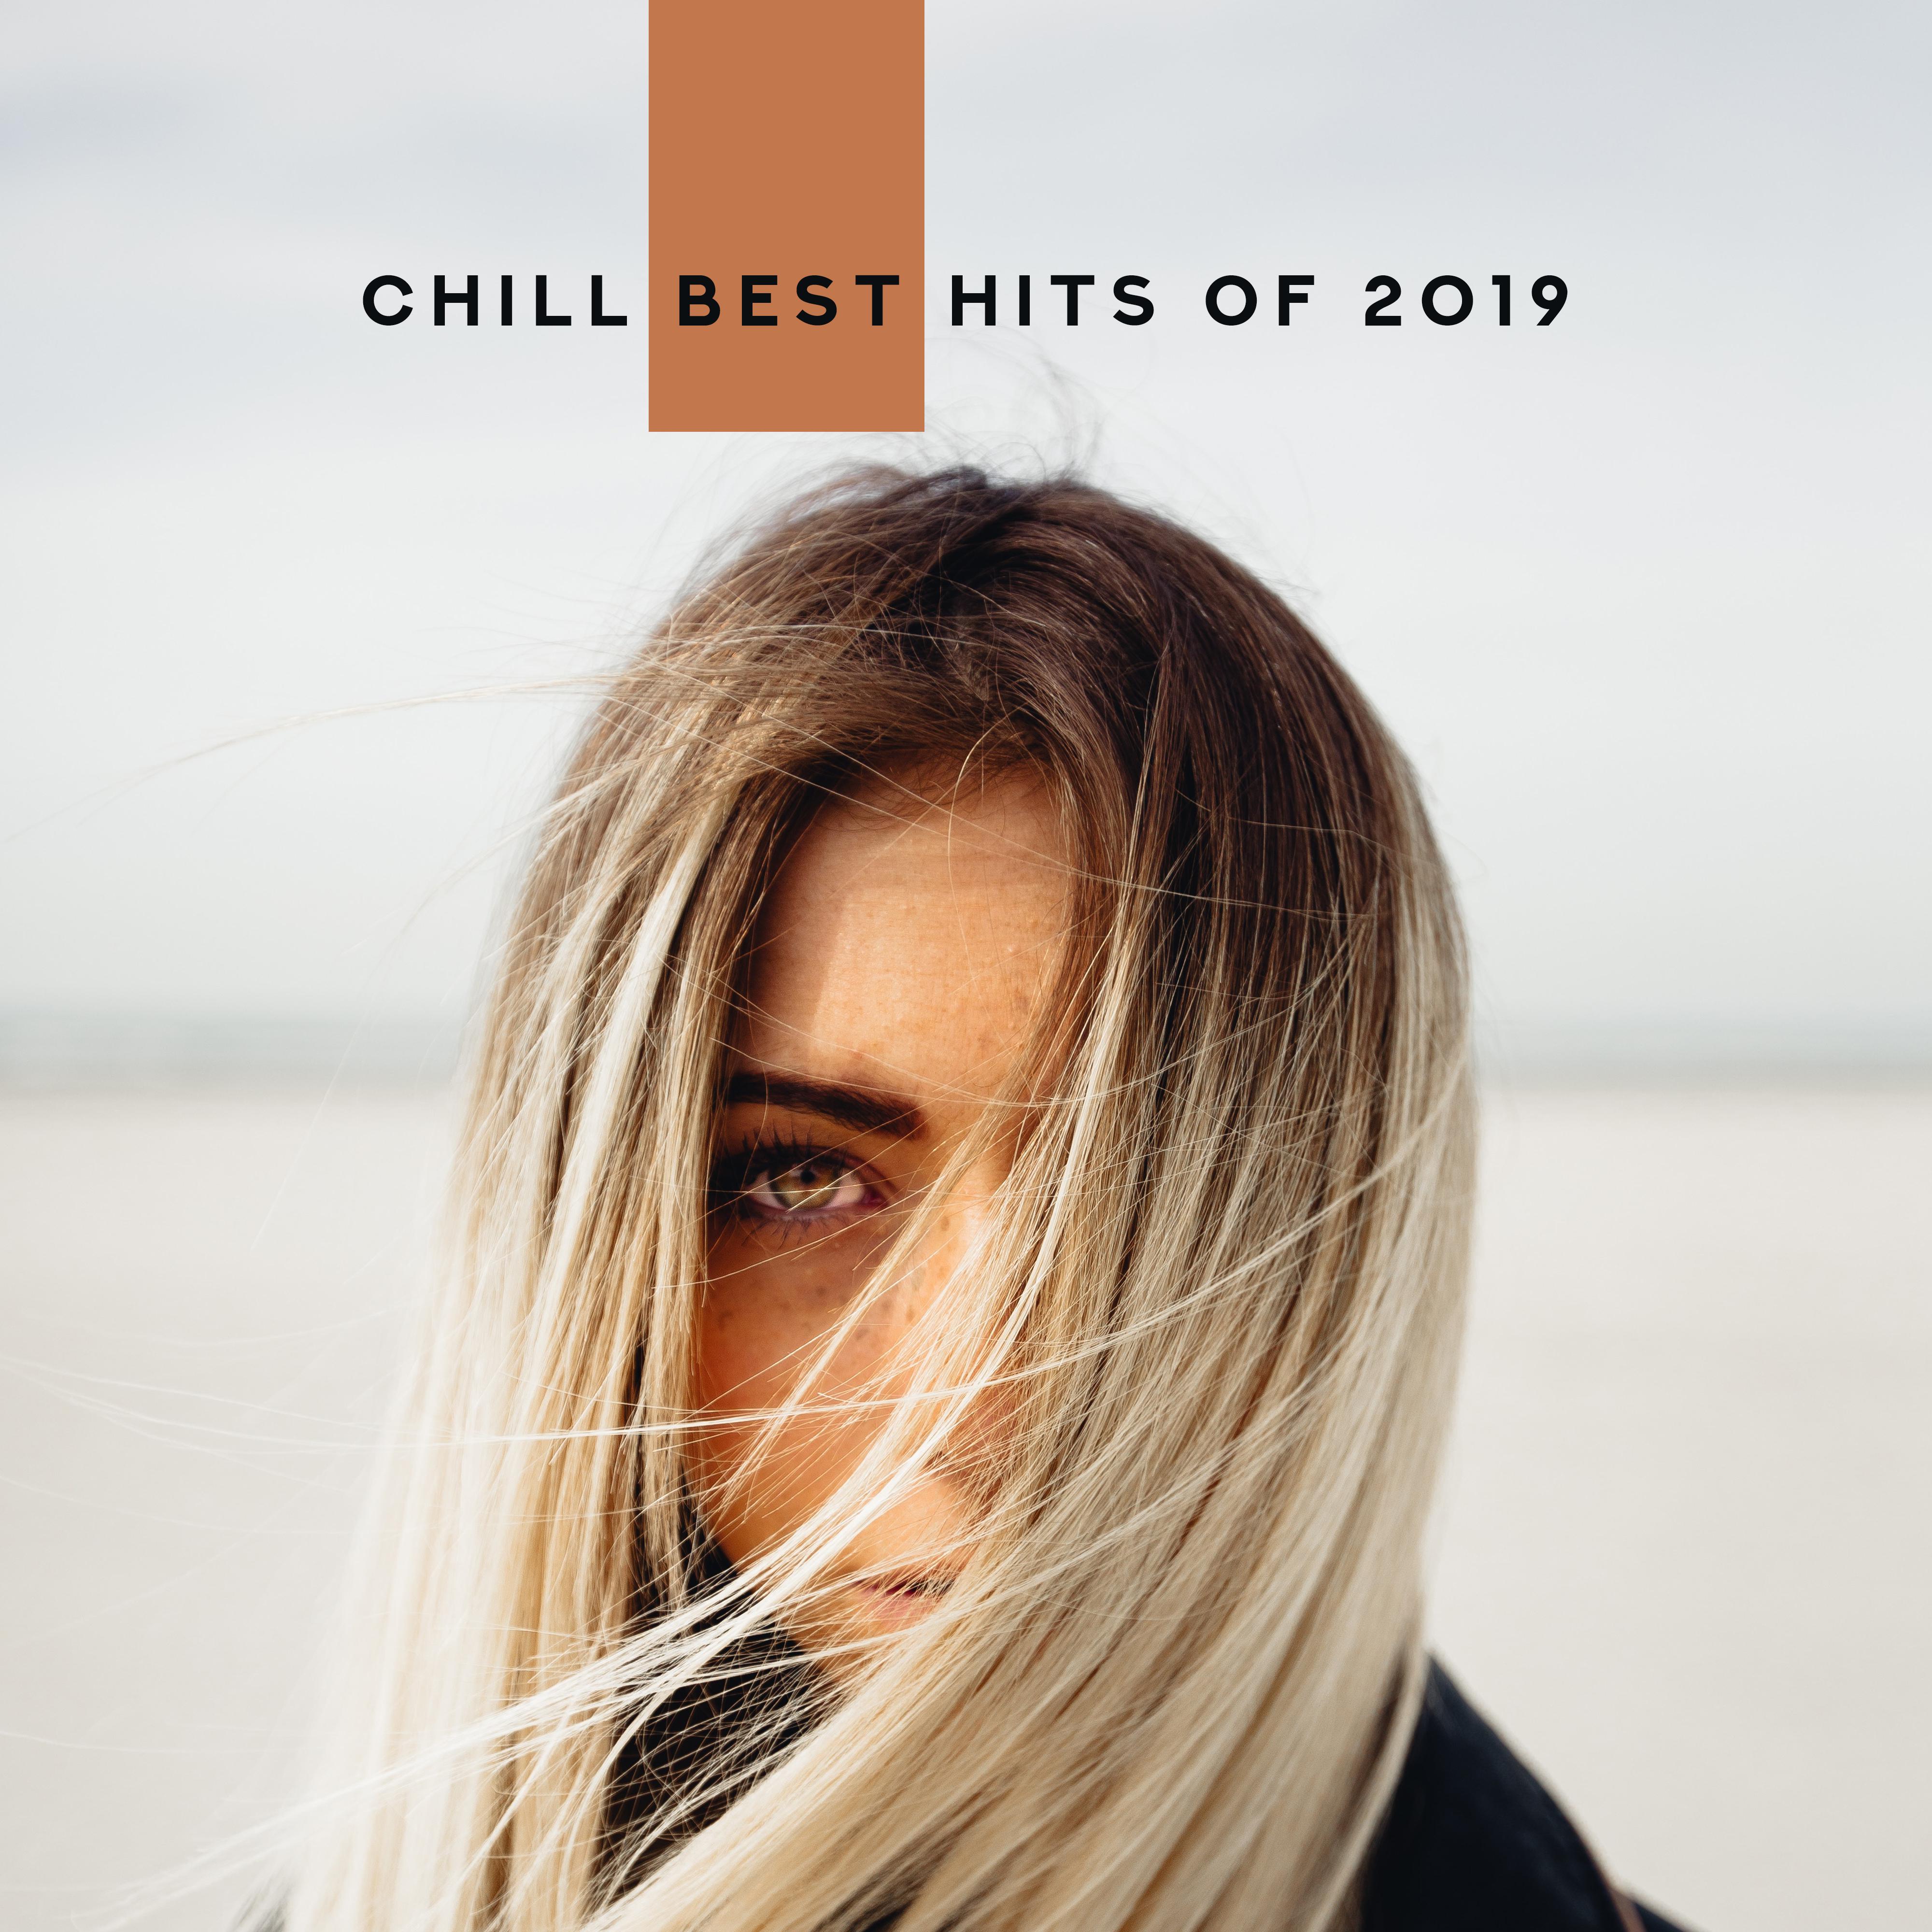 Chill Best Hits of 2019: Selection of Top Chillout Music Tracks for Total Relaxation, Stress Relief Songs, Friday Chillin